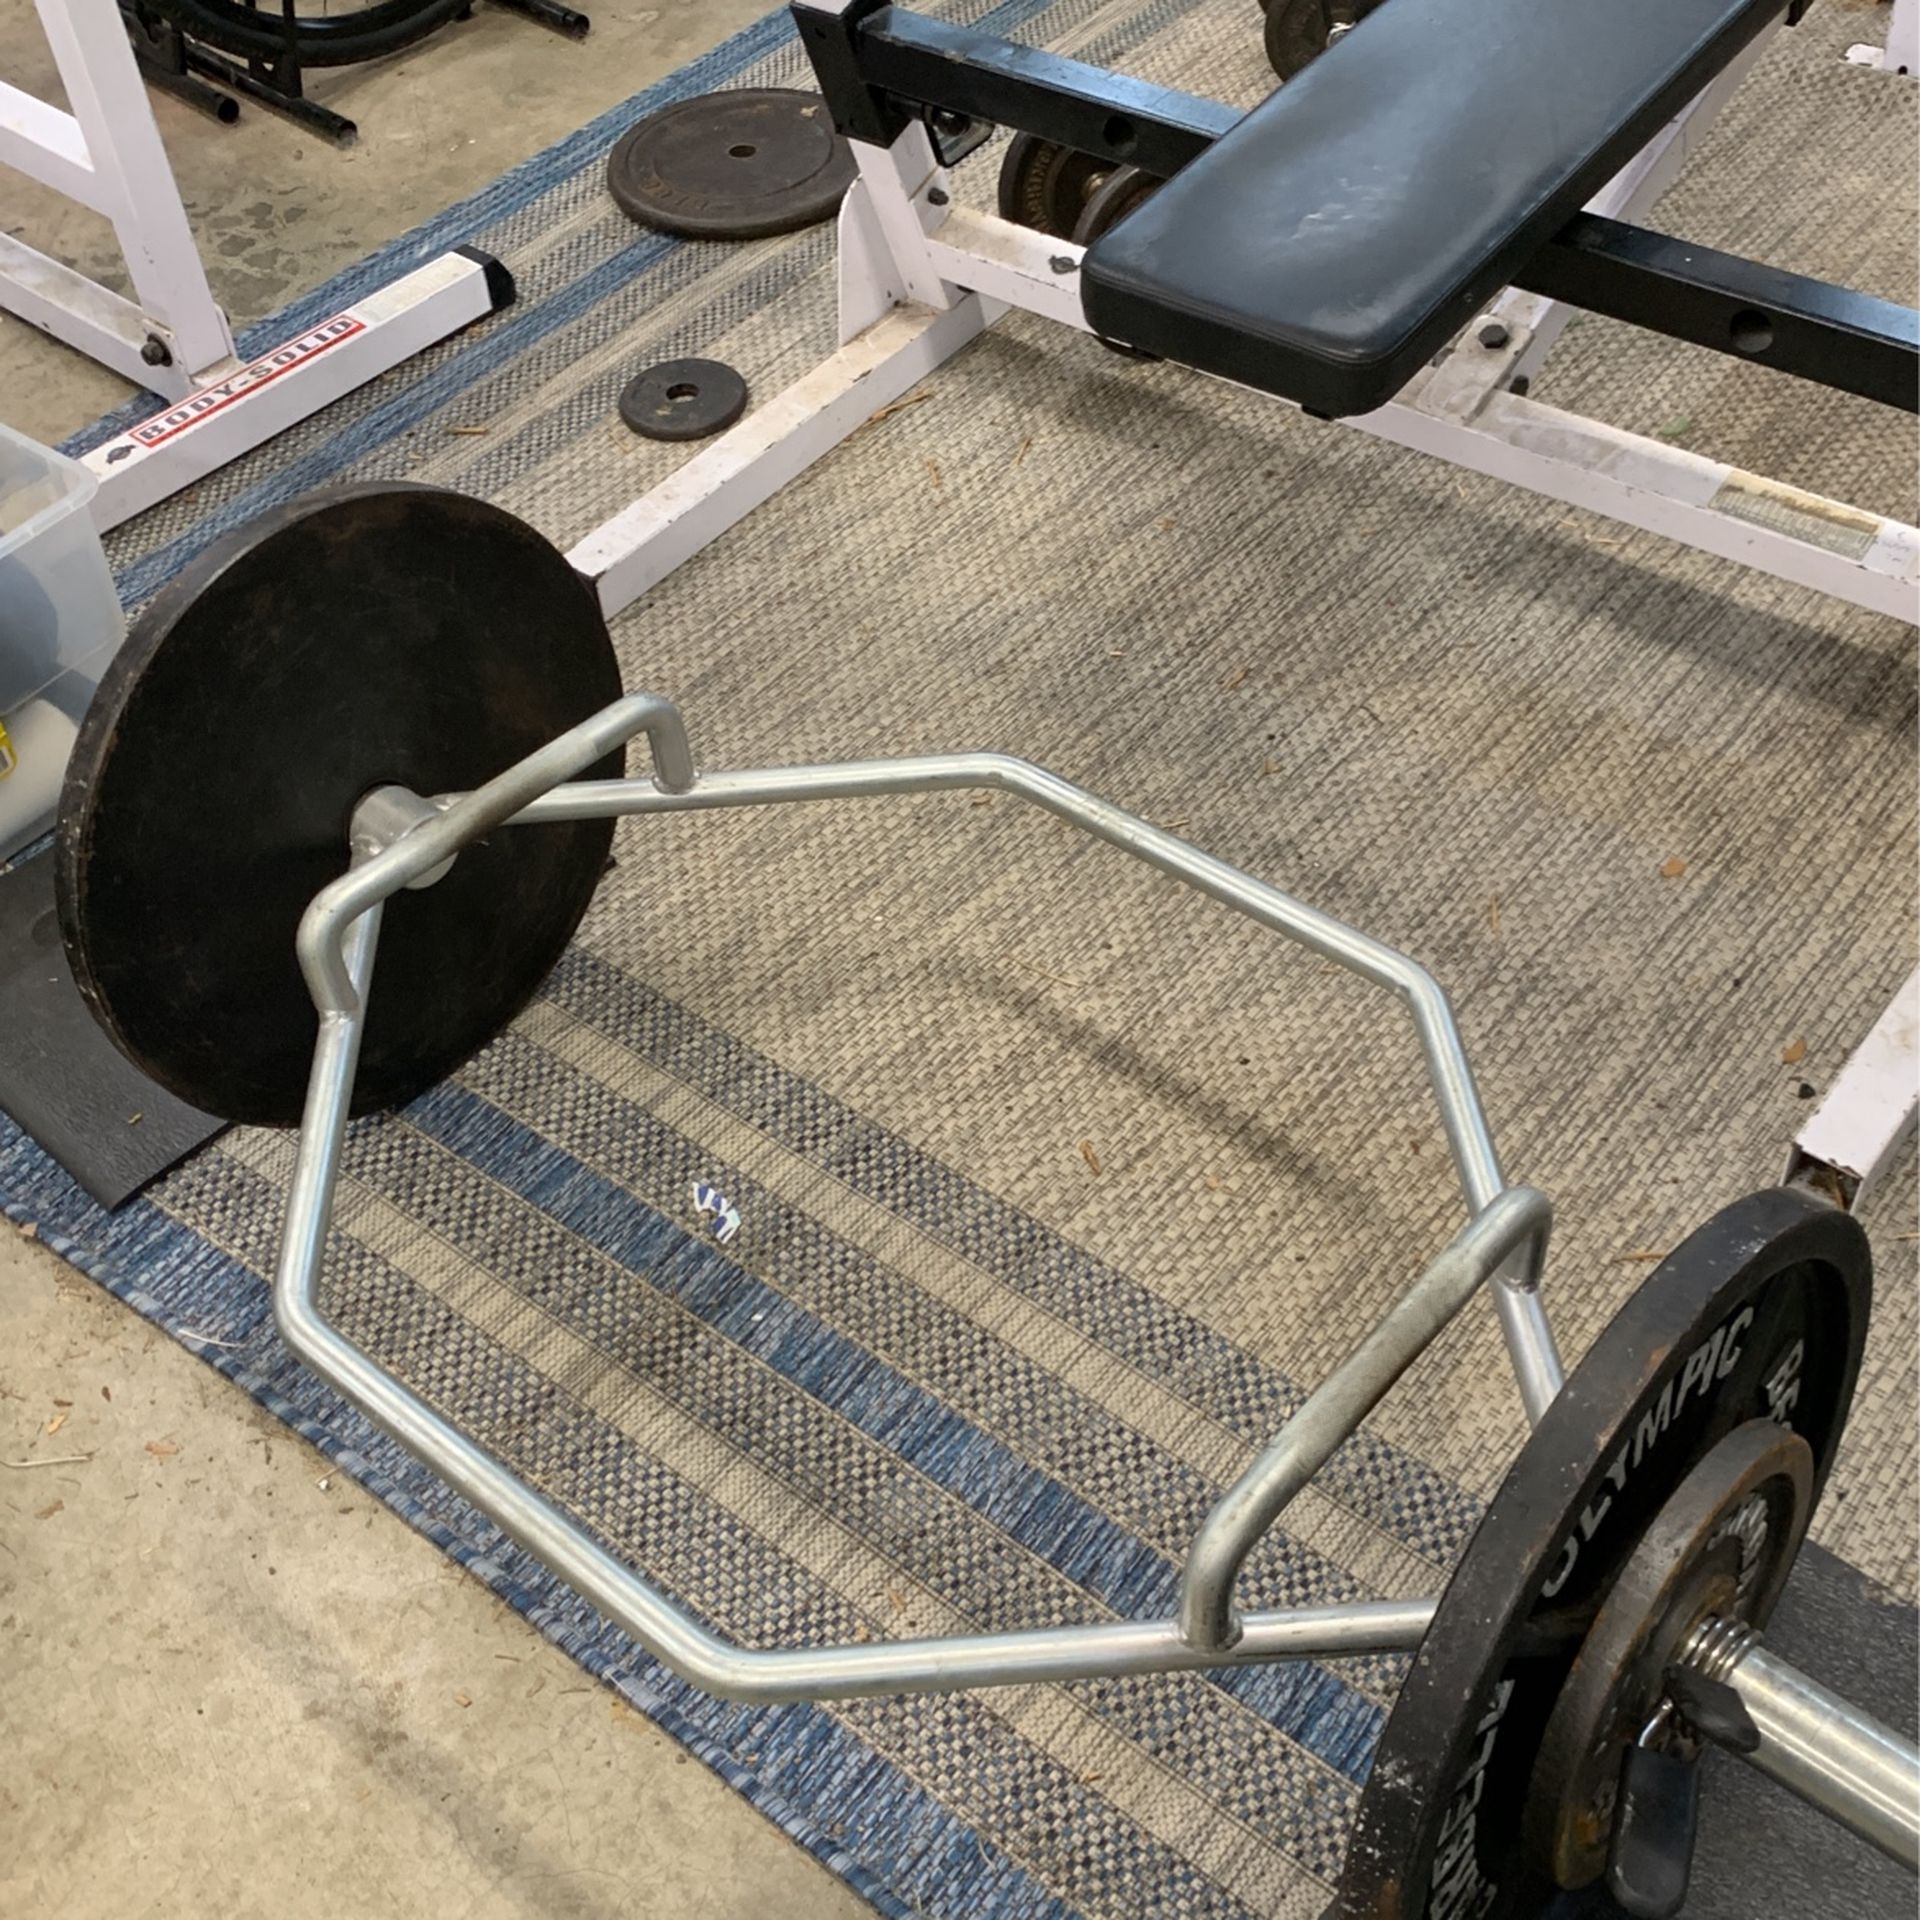 Trap/deadlift Bar With Weights